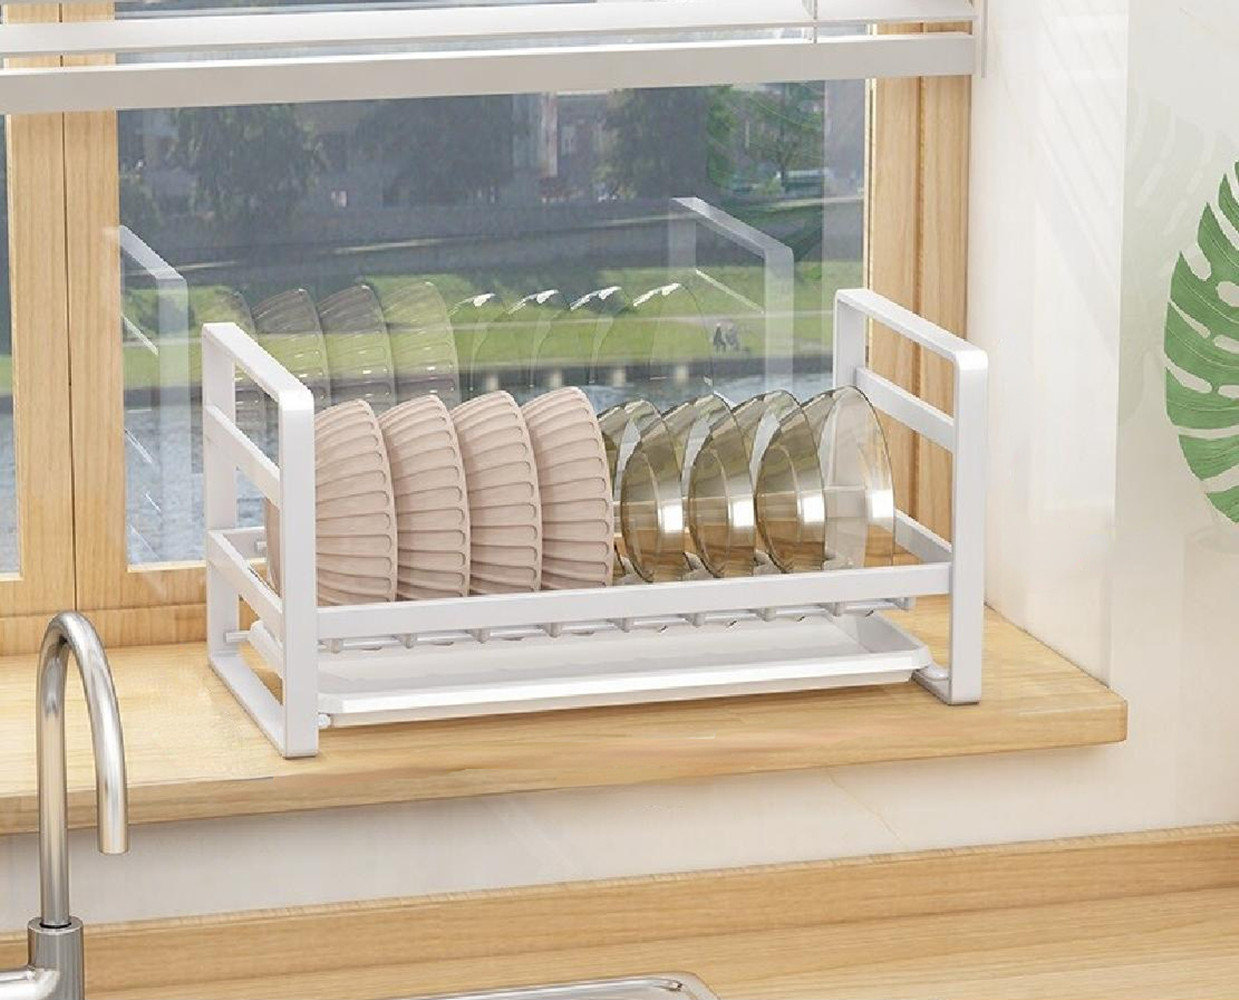 Umber Rea Kitchen Stainless Steel Countertop Dish Rack